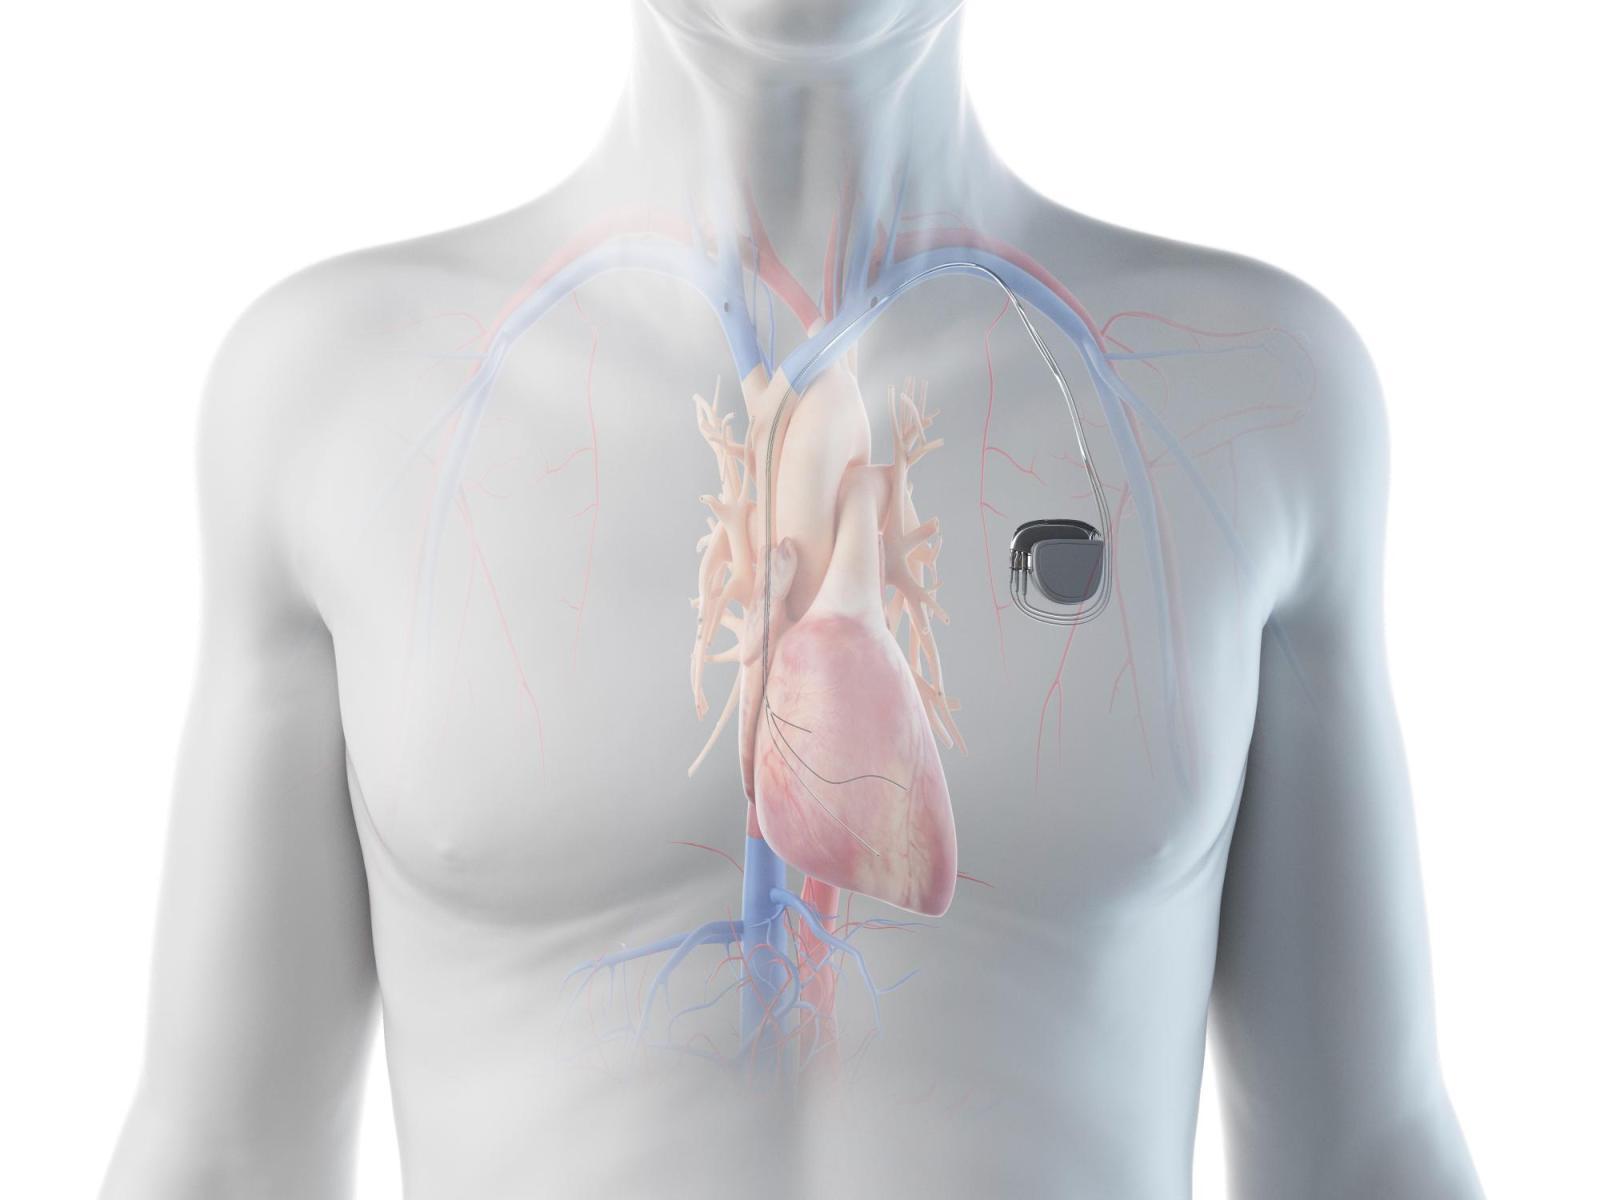 3D rendered illustration of a man with a pacemaker.